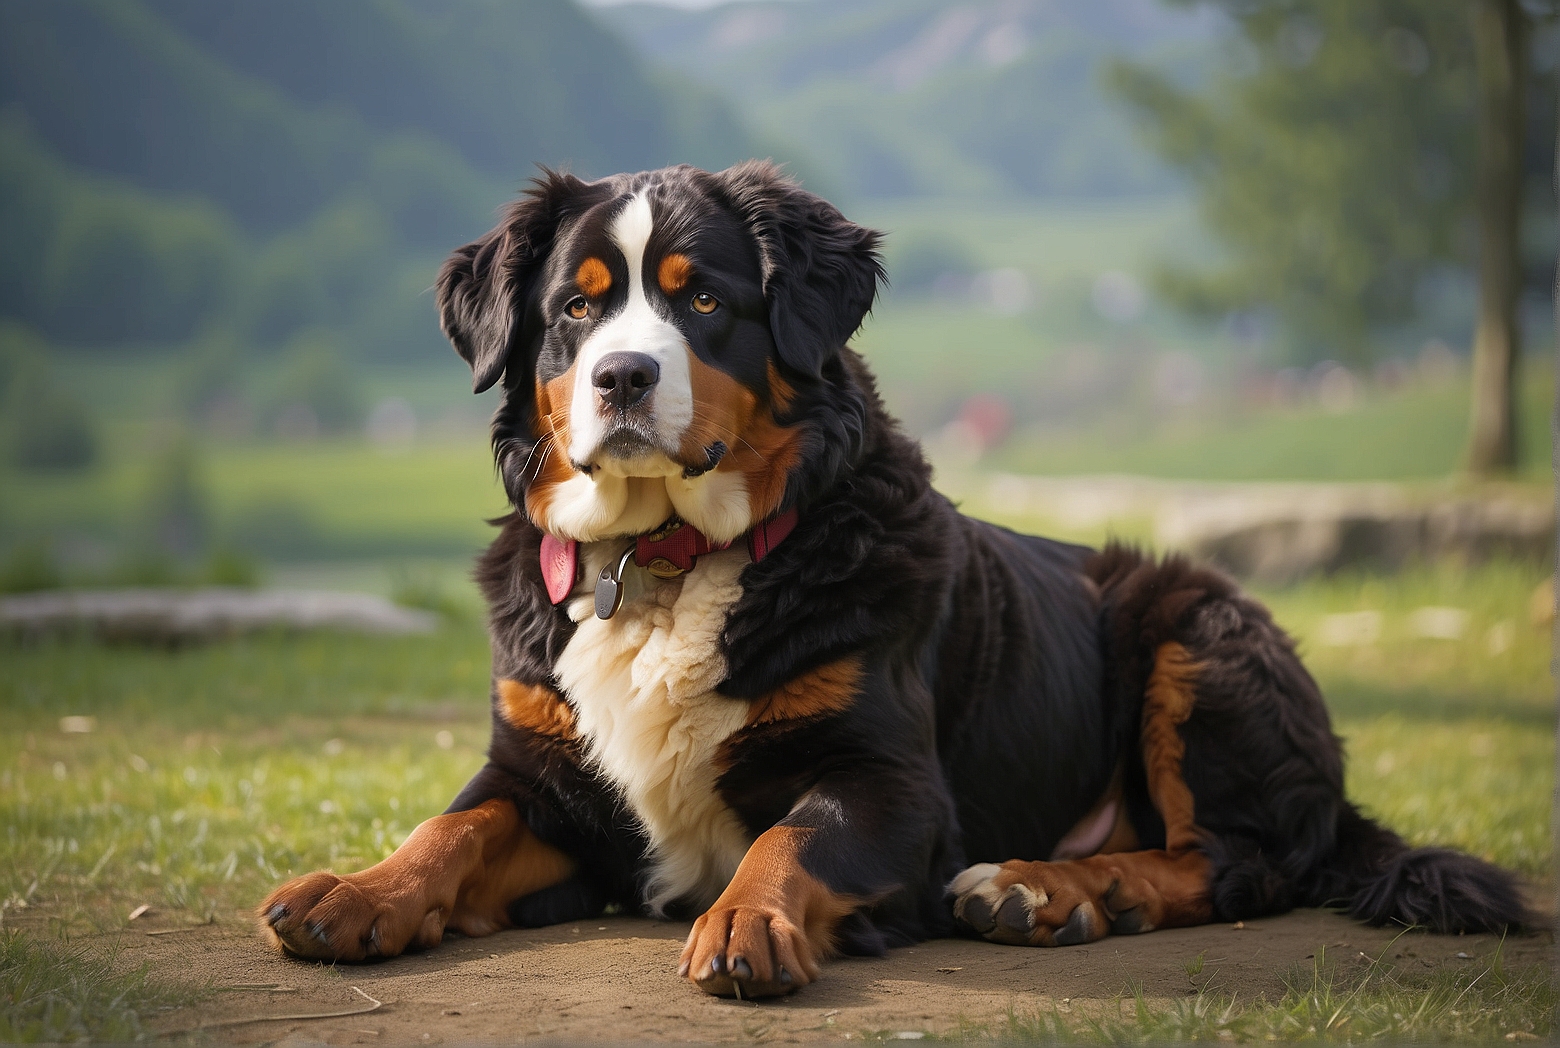 How Many Breeds of Bernese Mountain Dogs Exist?